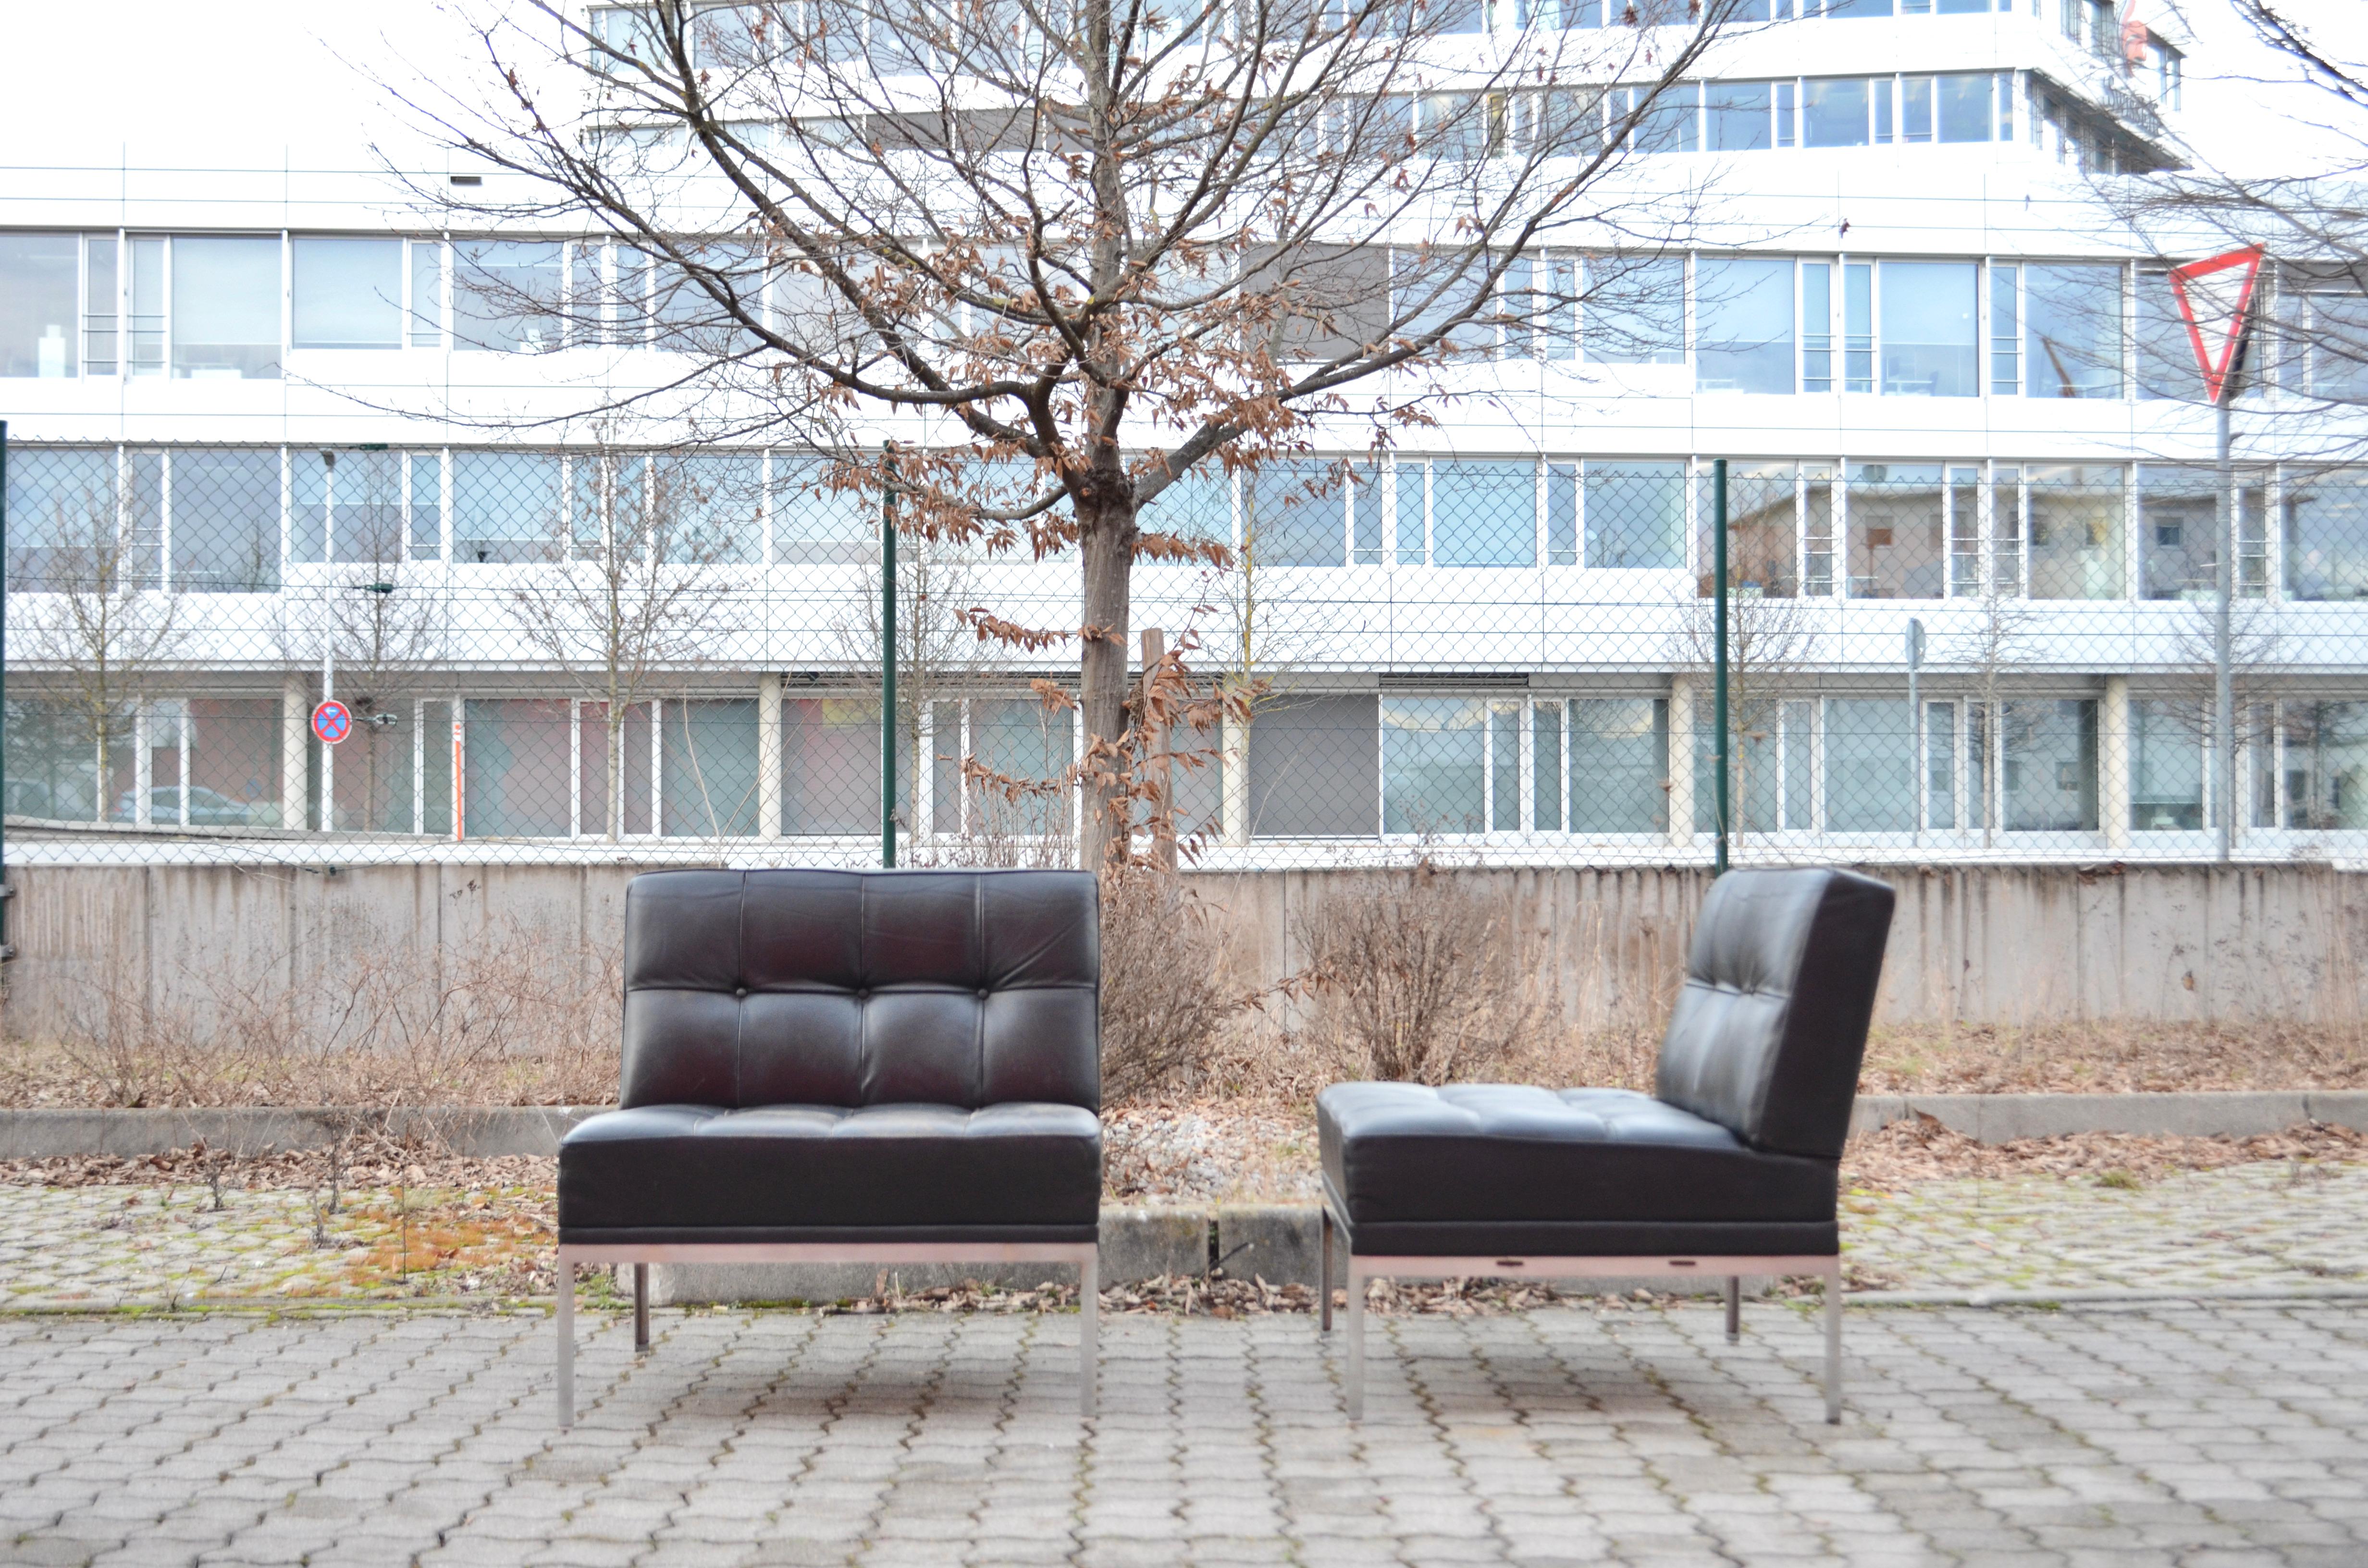 The easy lounge chairs Model Constanze by Austrian architect Johannes Spalt for Wittmann. 
Its fits well to the Constanze daybed.
A classic mid century Design in tufted design.
Produced in the 1960s.
Chrome frame and Black Aniline leather. 
1